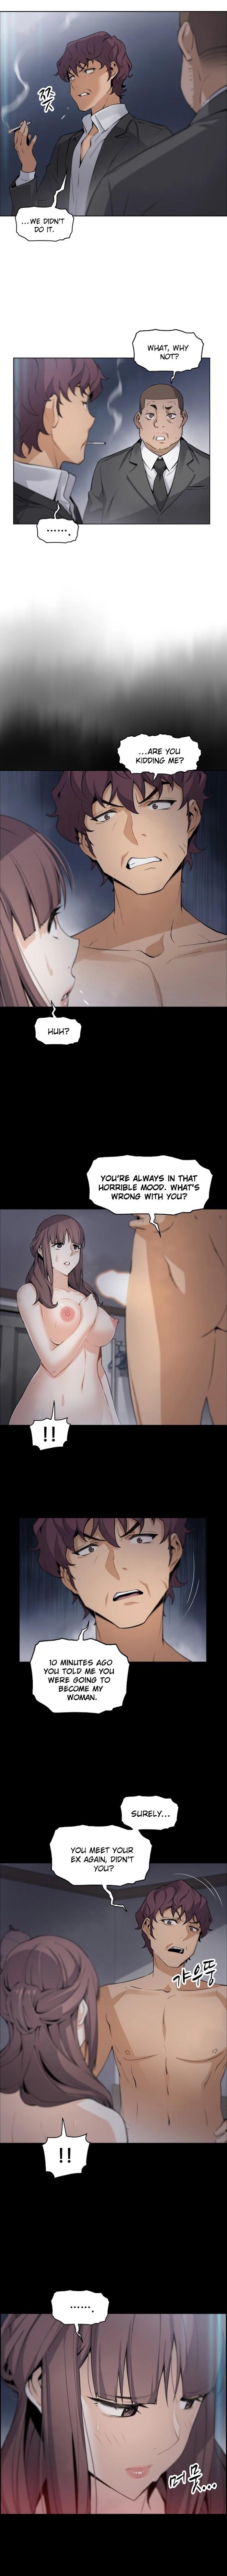 Housekeeper [Neck Pillow, Paper] Ch.49/49 [English] [Manhwa PDF] Completed 142